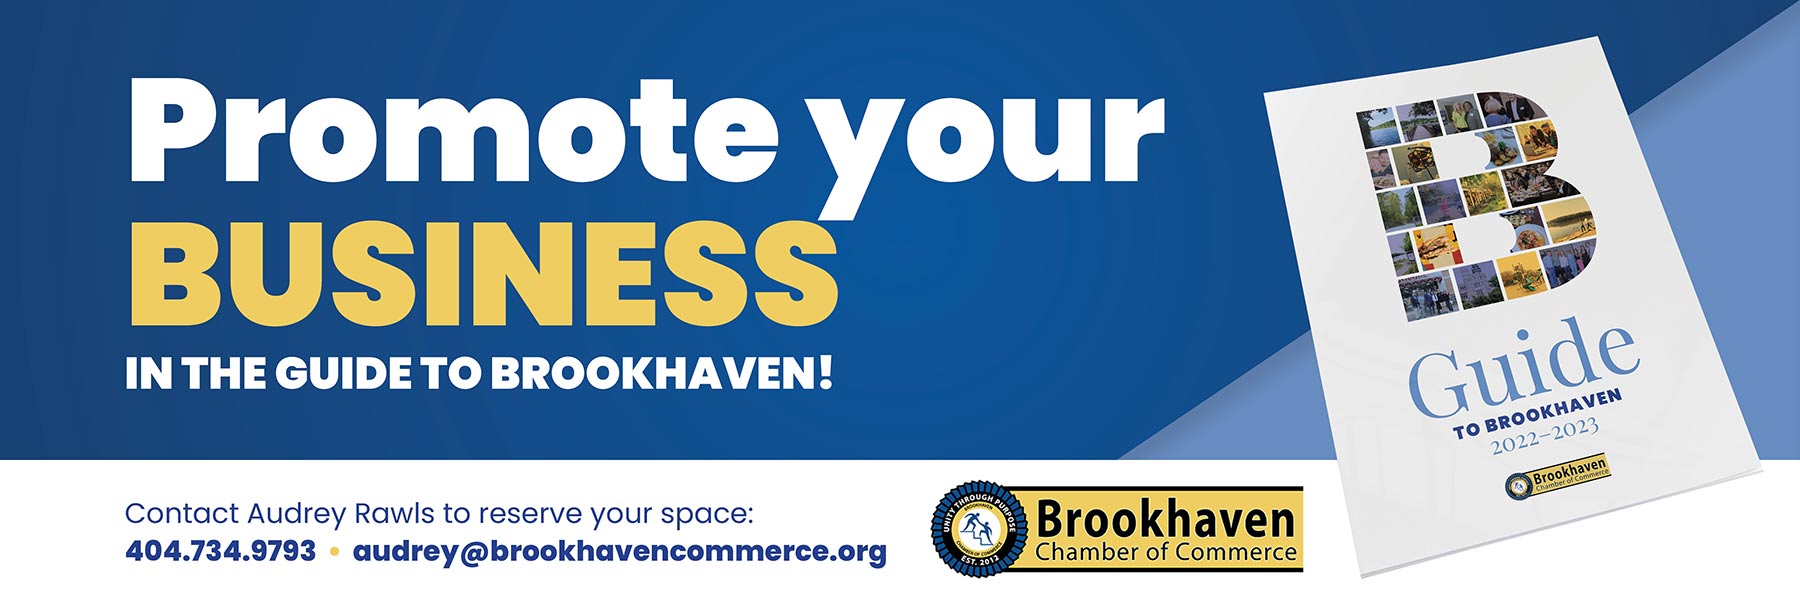 Brookhaven Chamber of Commerce